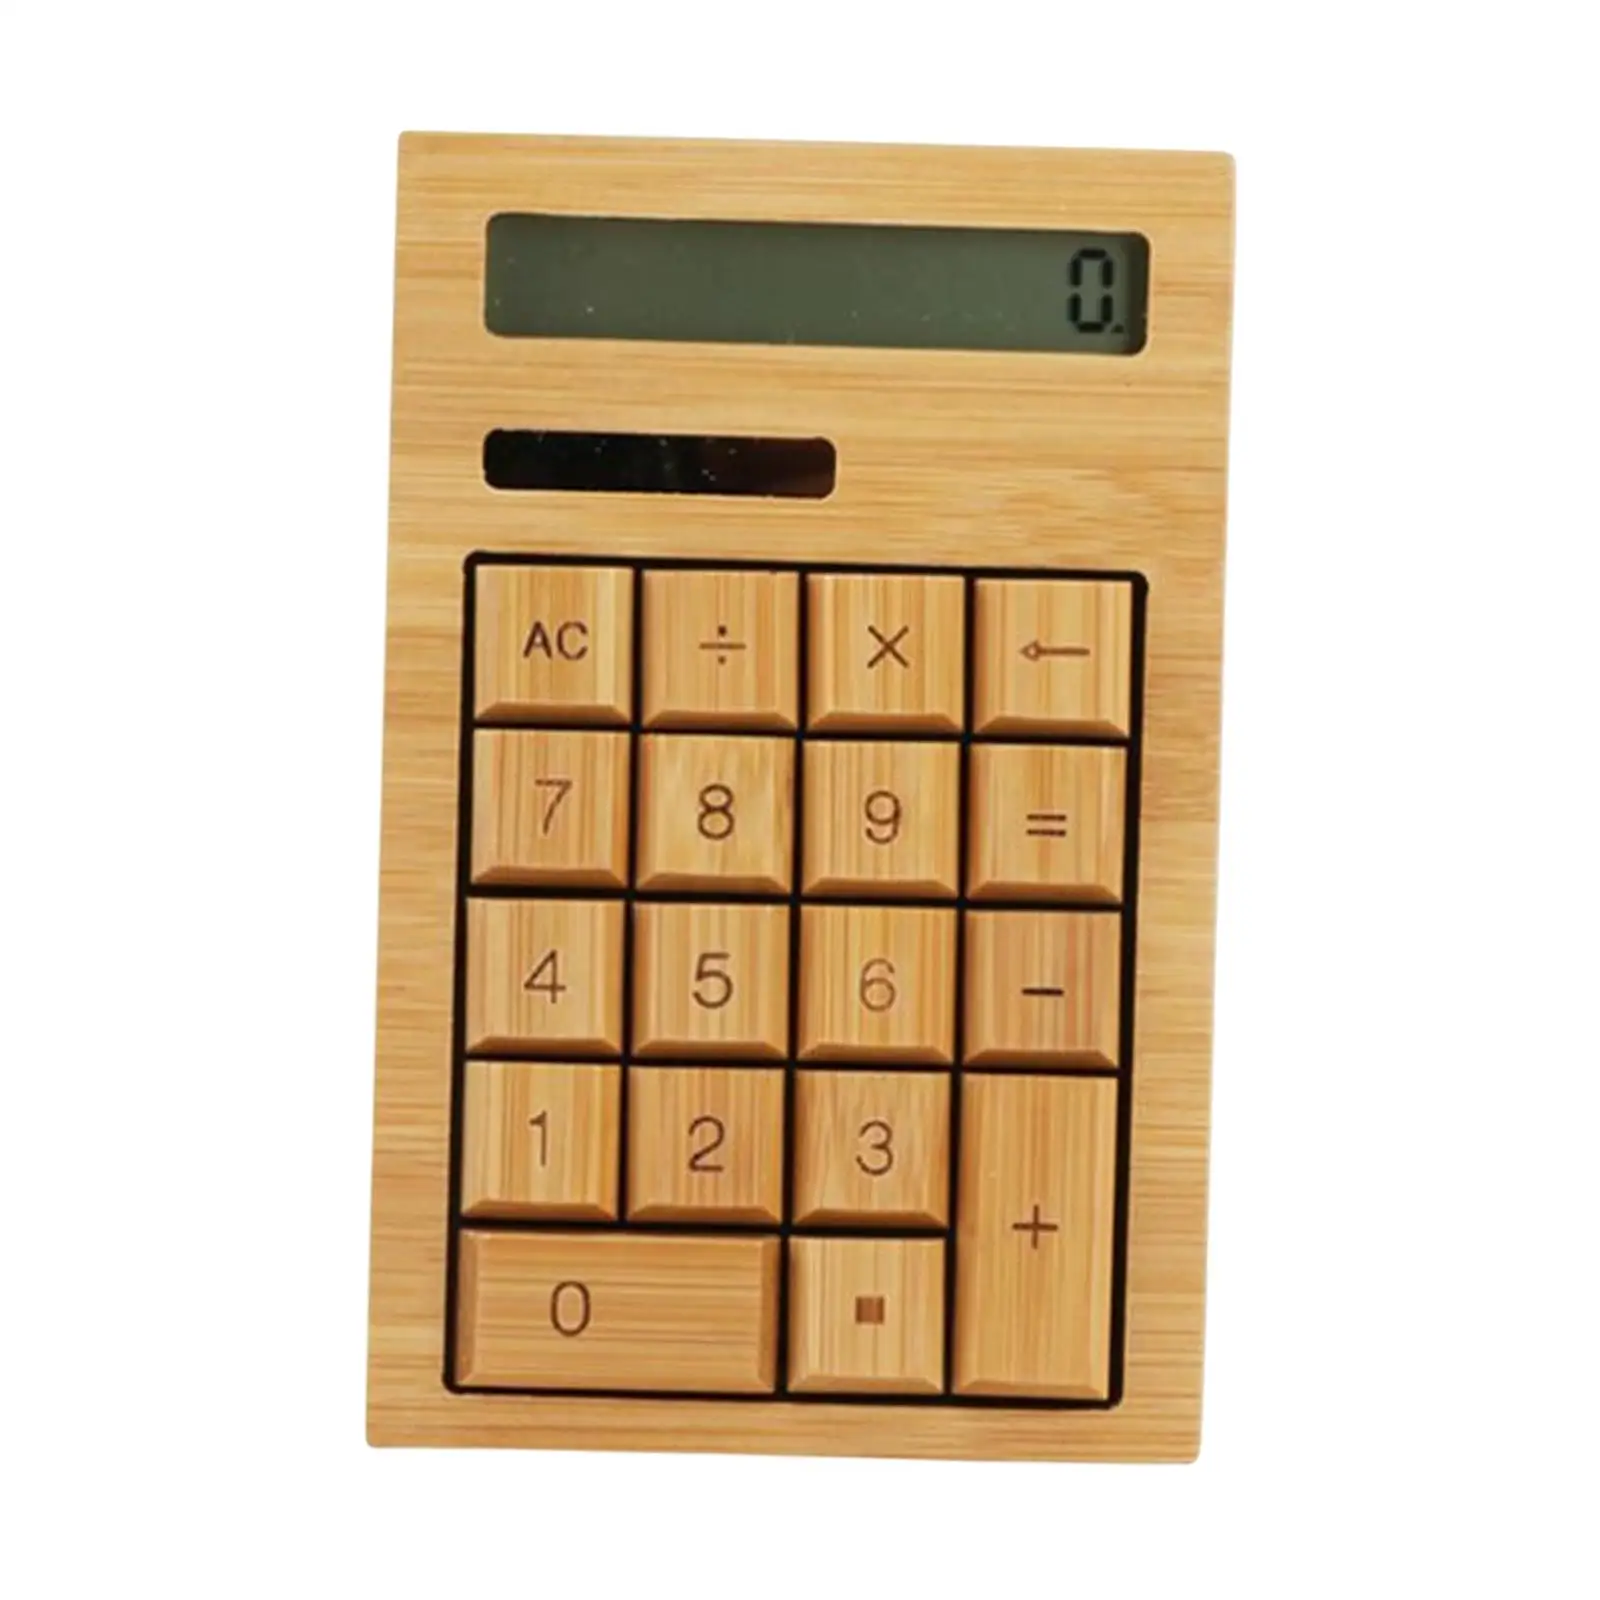 Bamboo Calculator Solar Power Portable 18 Buttons Anti Static 12 digits Desktop Calculator Functional for Business Office Home